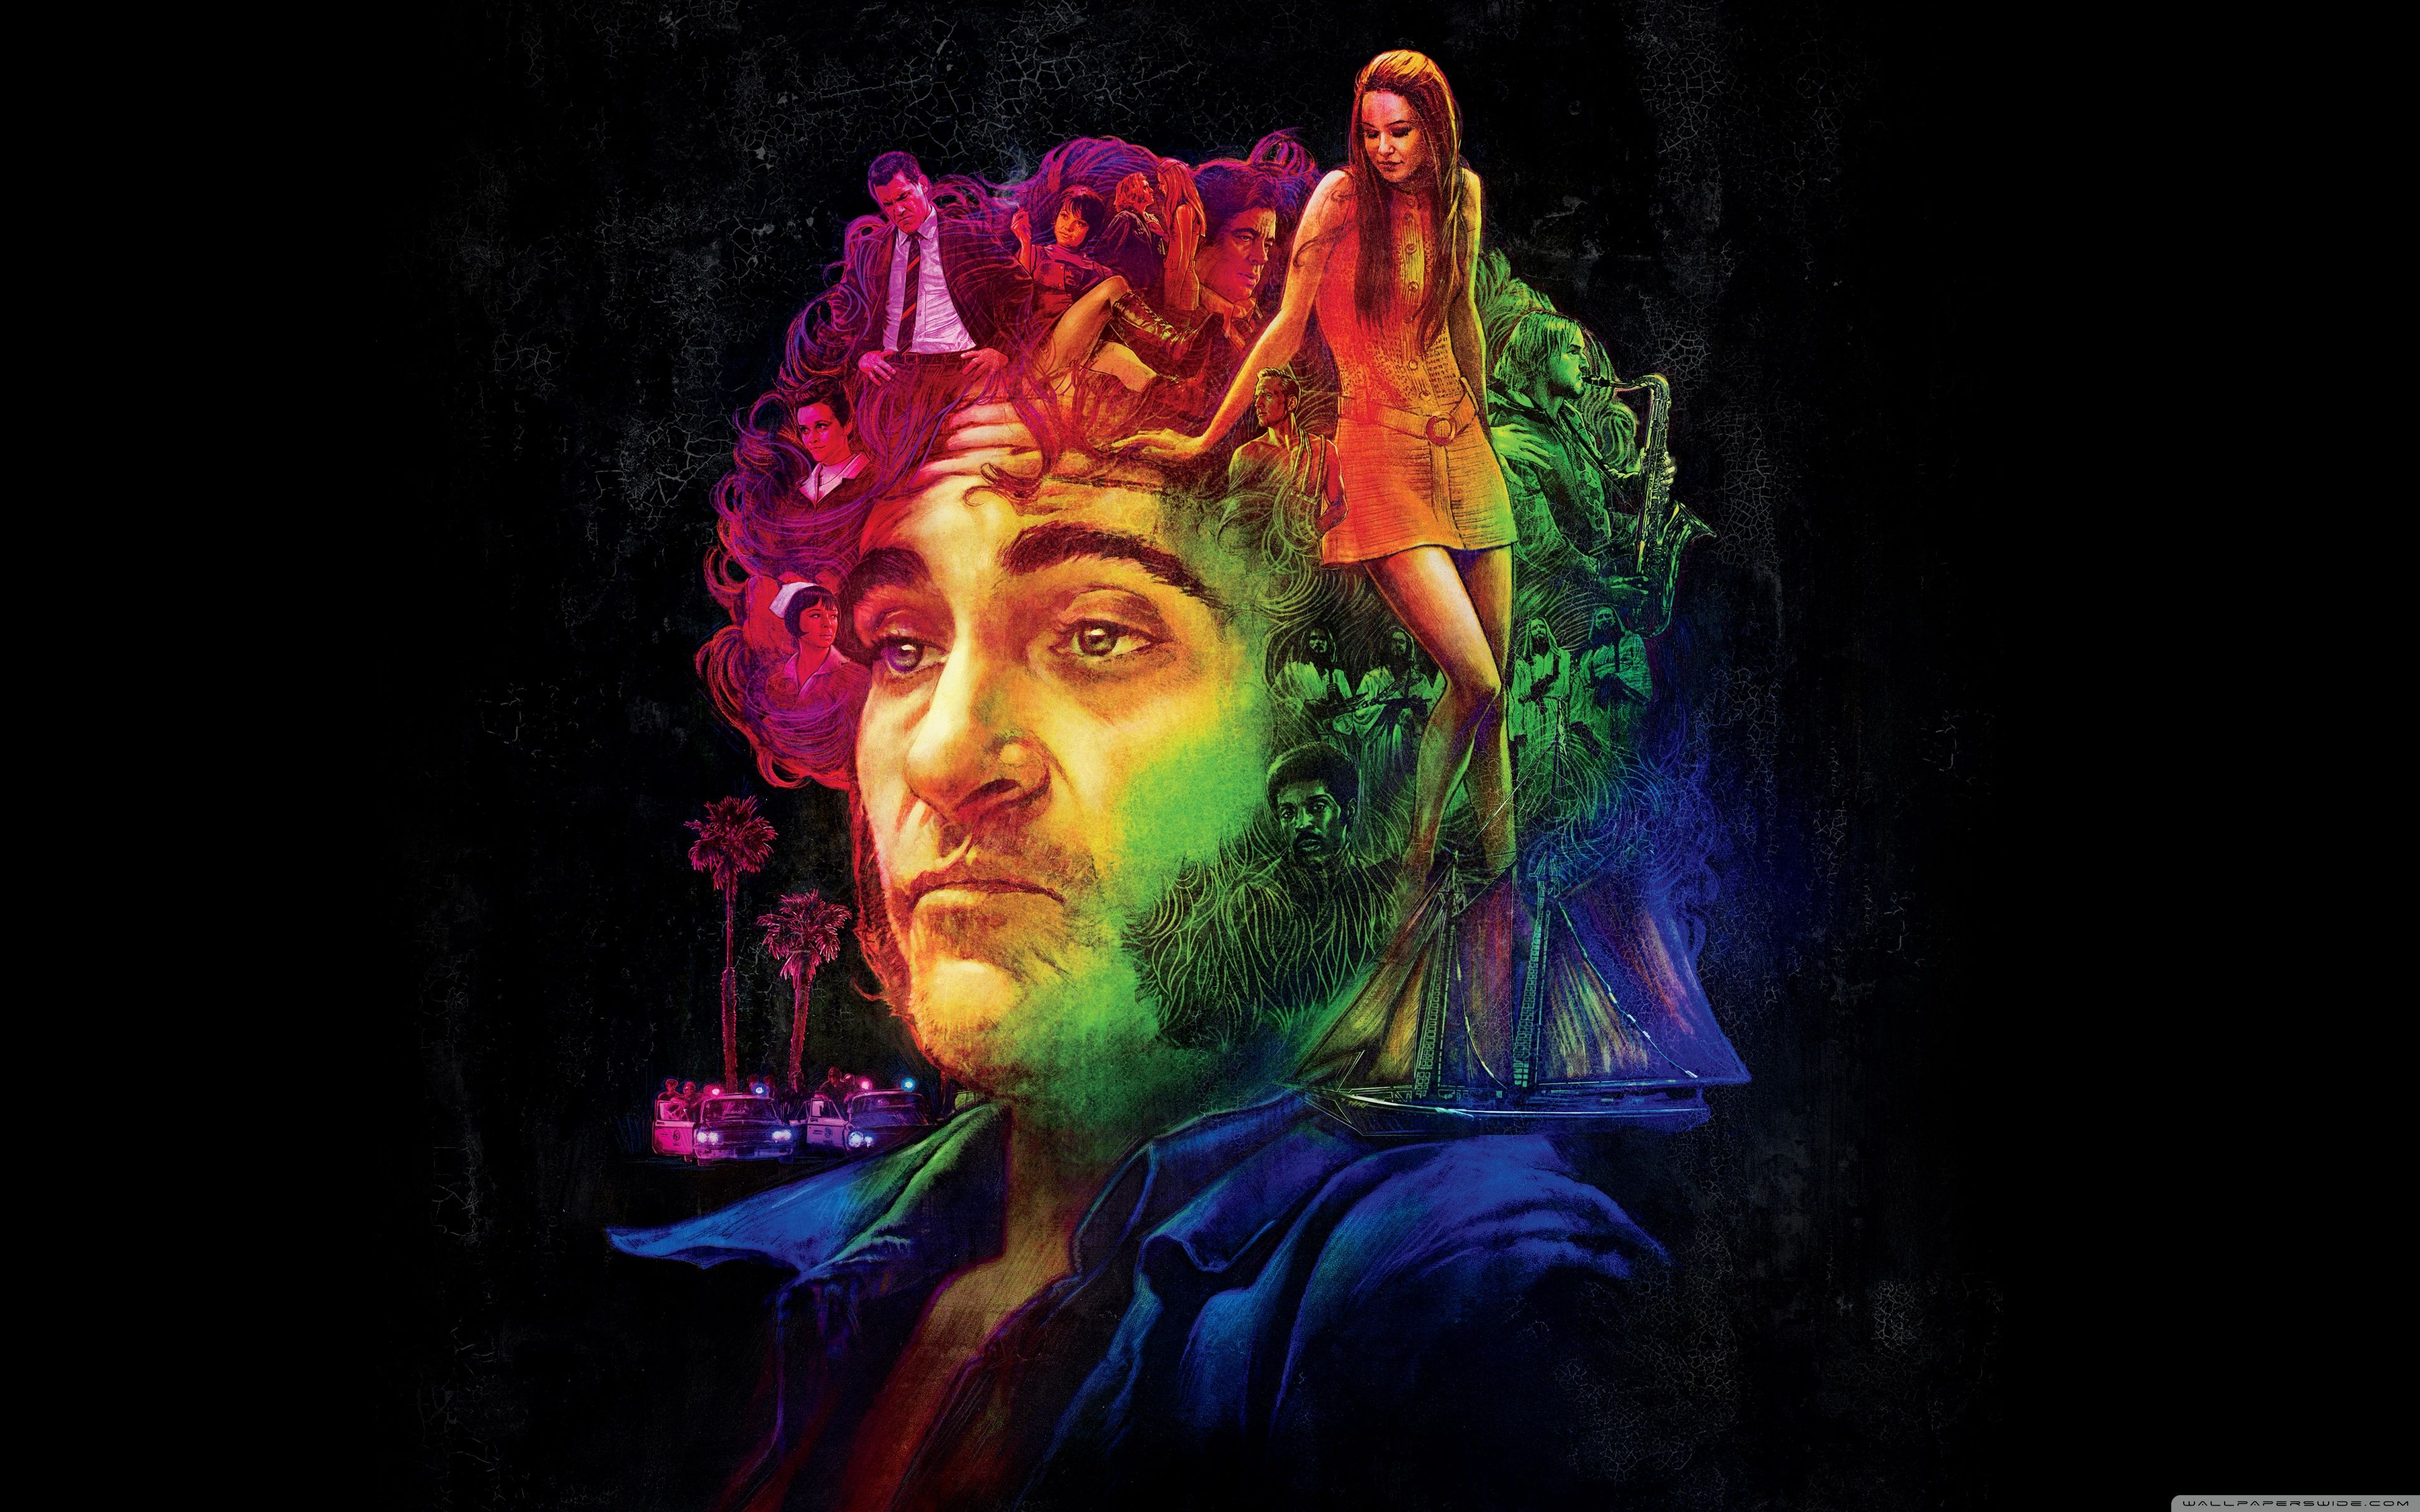 Inherent Vice Wallpapers